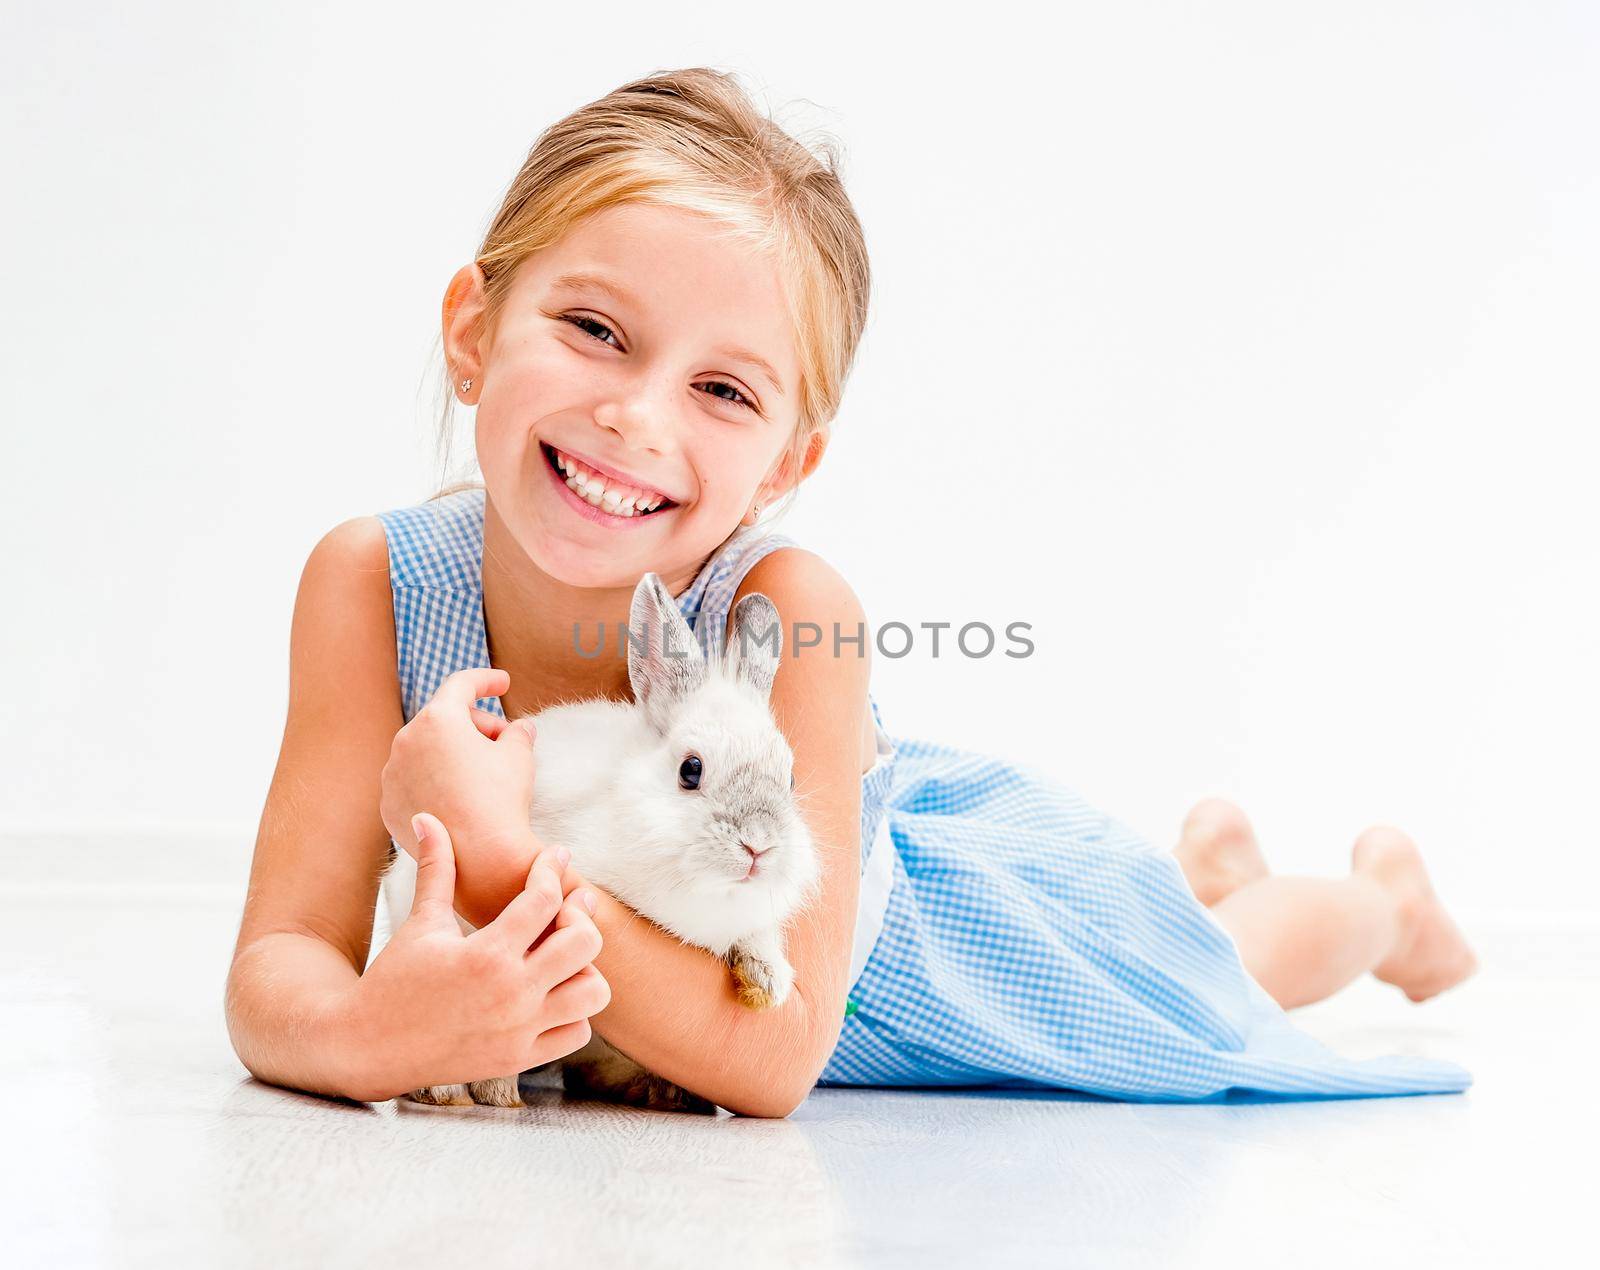 cute smiling girl in a blue dress with a white rabbit